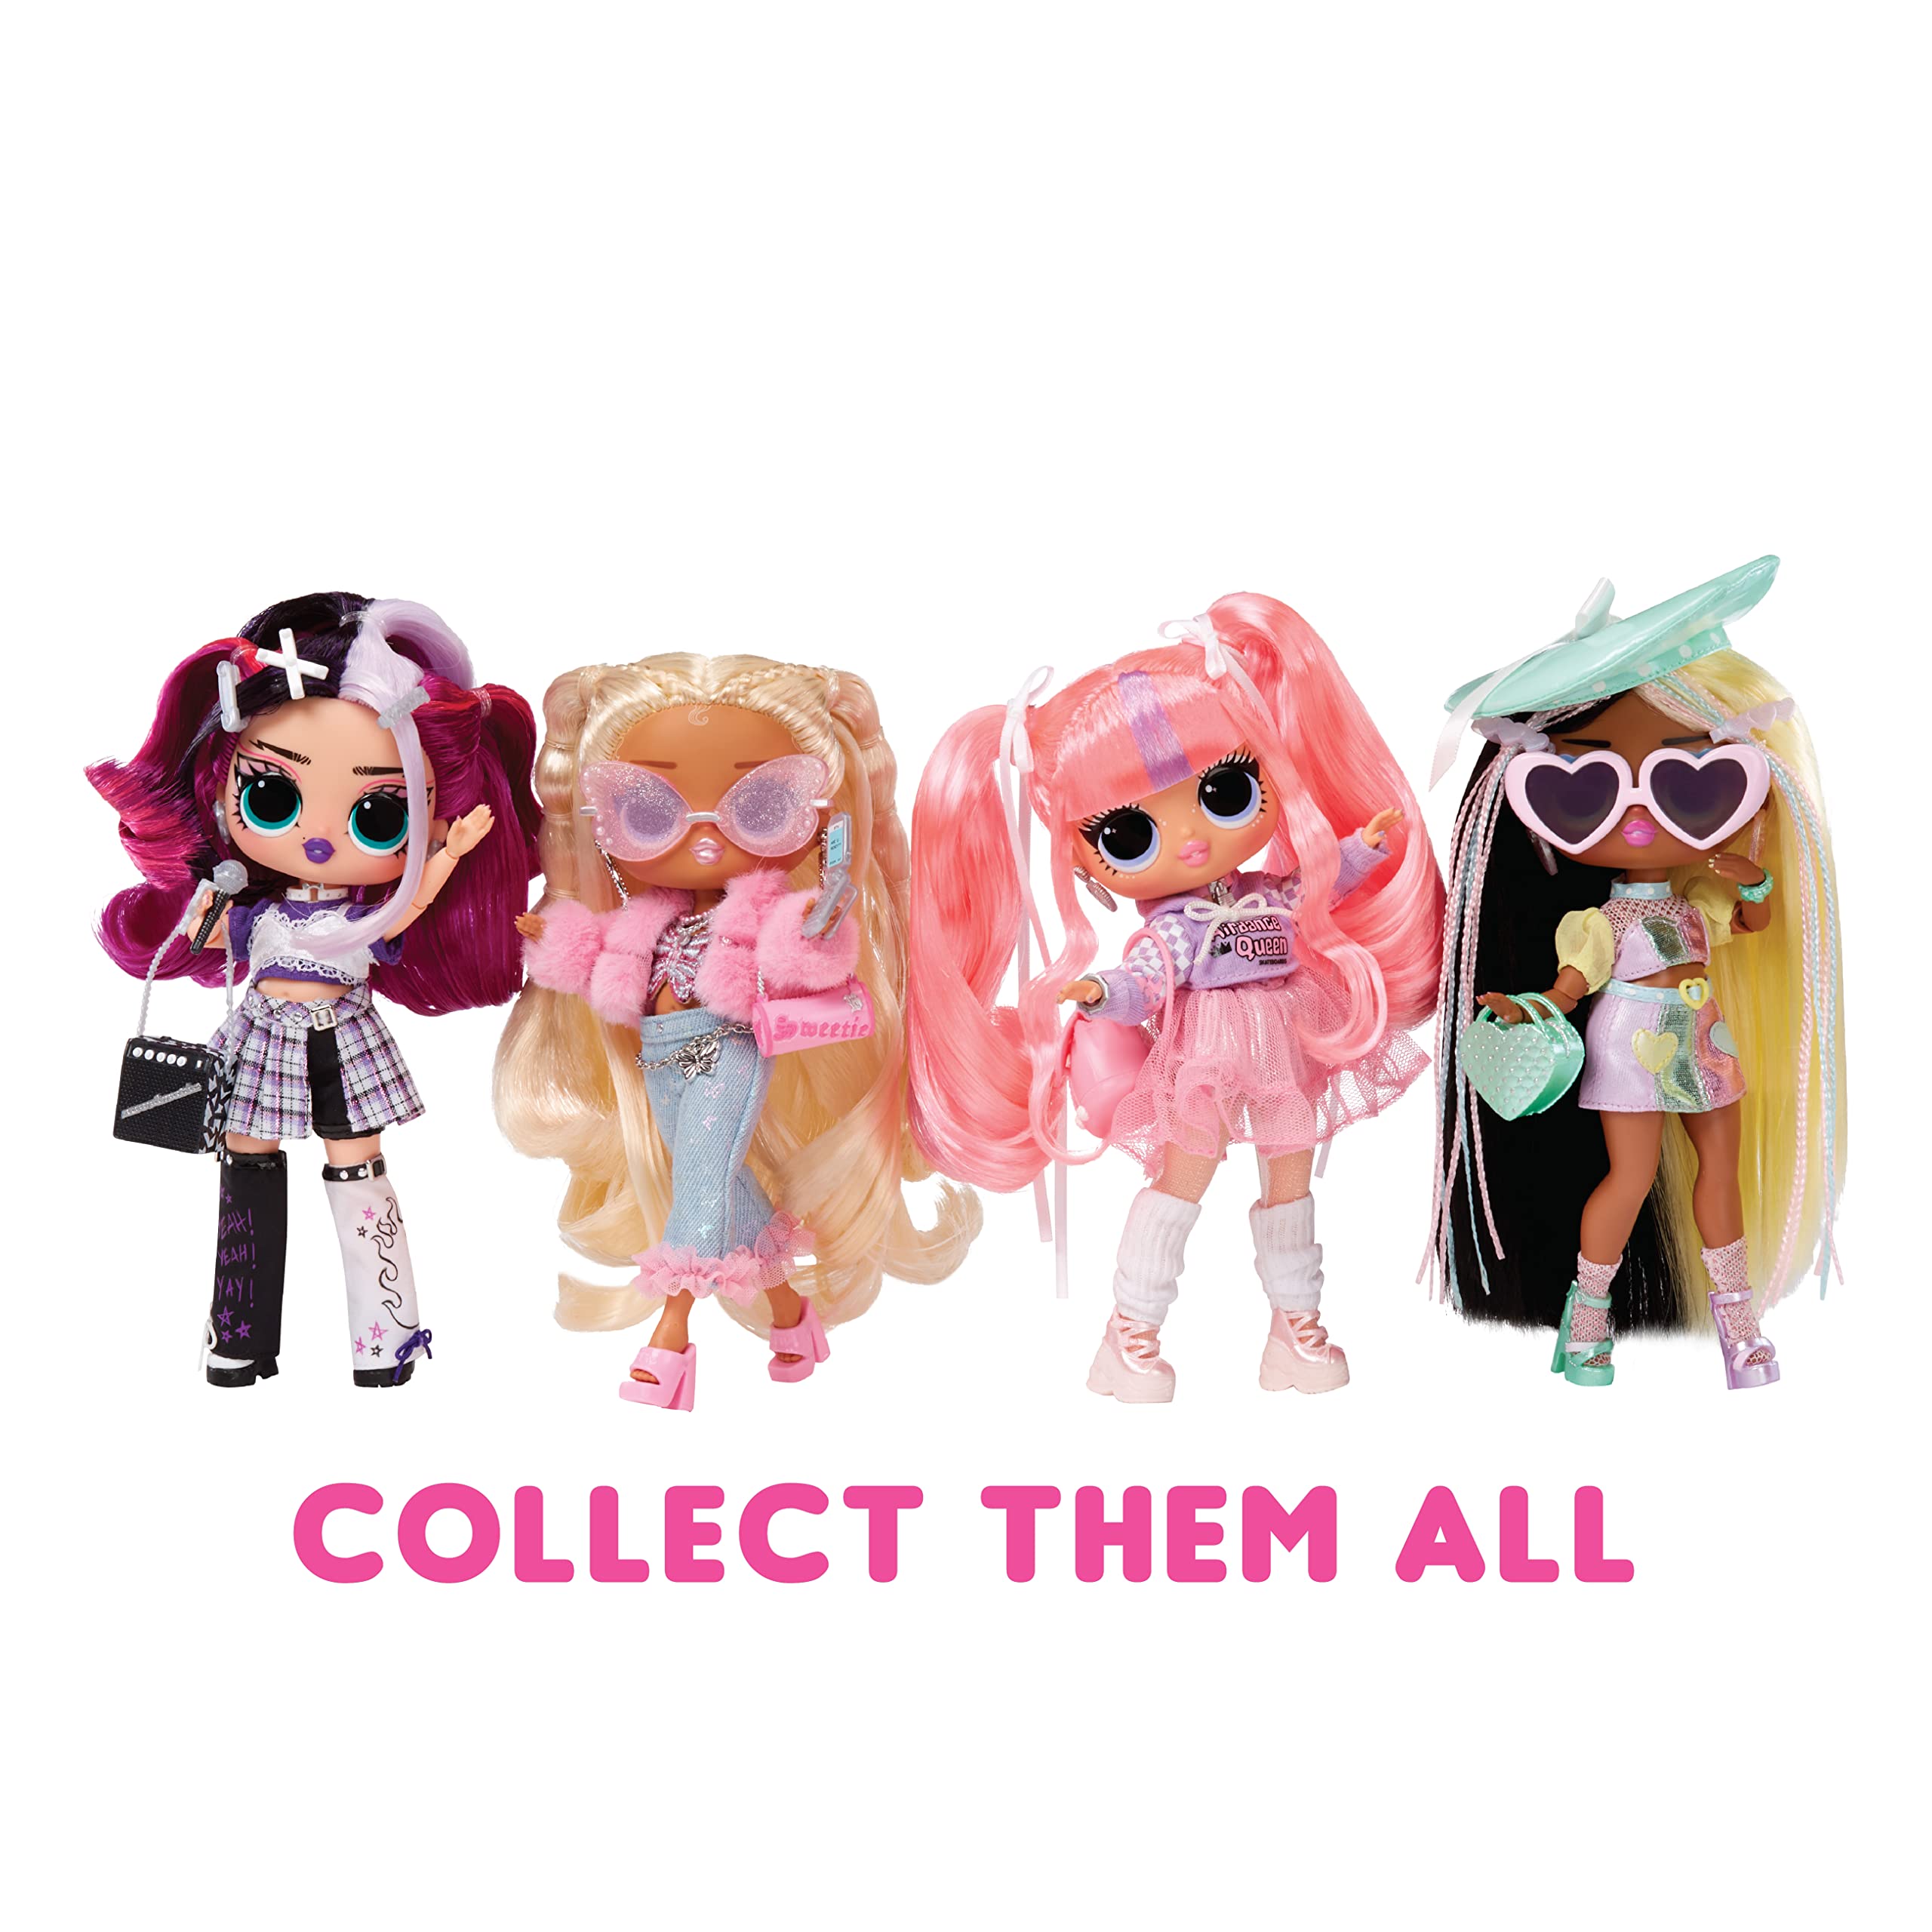 L.O.L. Surprise! Tweens Series 4 Fashion Doll Jenny Rox with 15 Surprises and Fabulous Accessories – Great Gift for Kids Ages 4+